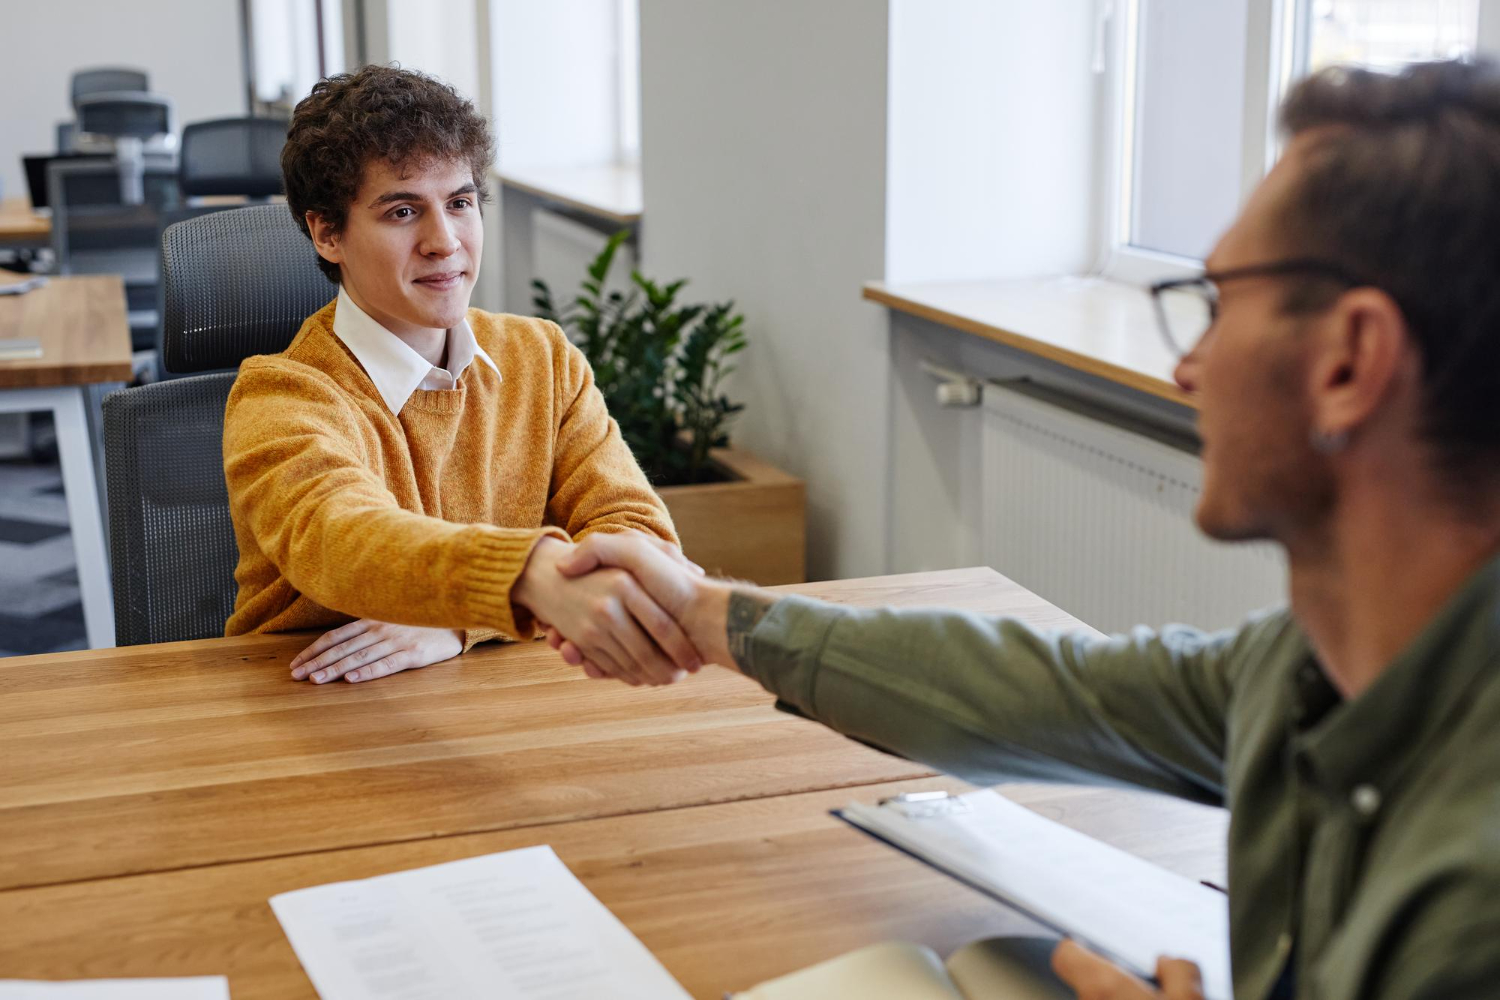 Young man in a yellow sweater shaking the hand of his new employer after accepting a job offer